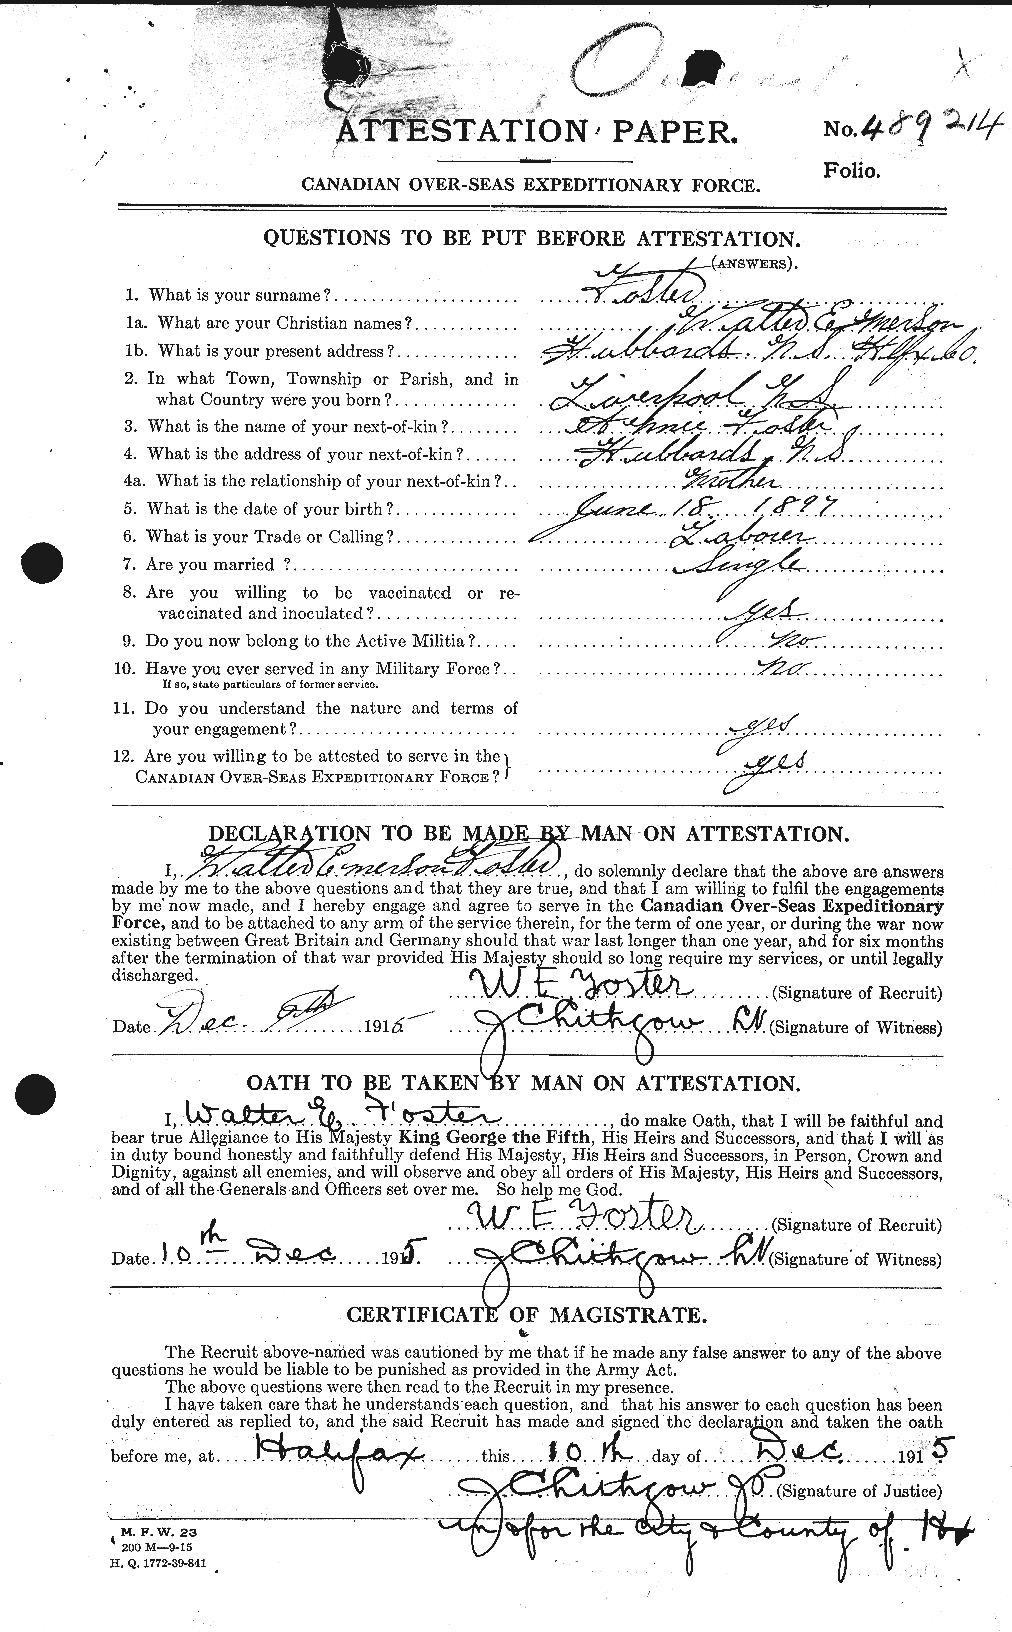 Personnel Records of the First World War - CEF 335256a